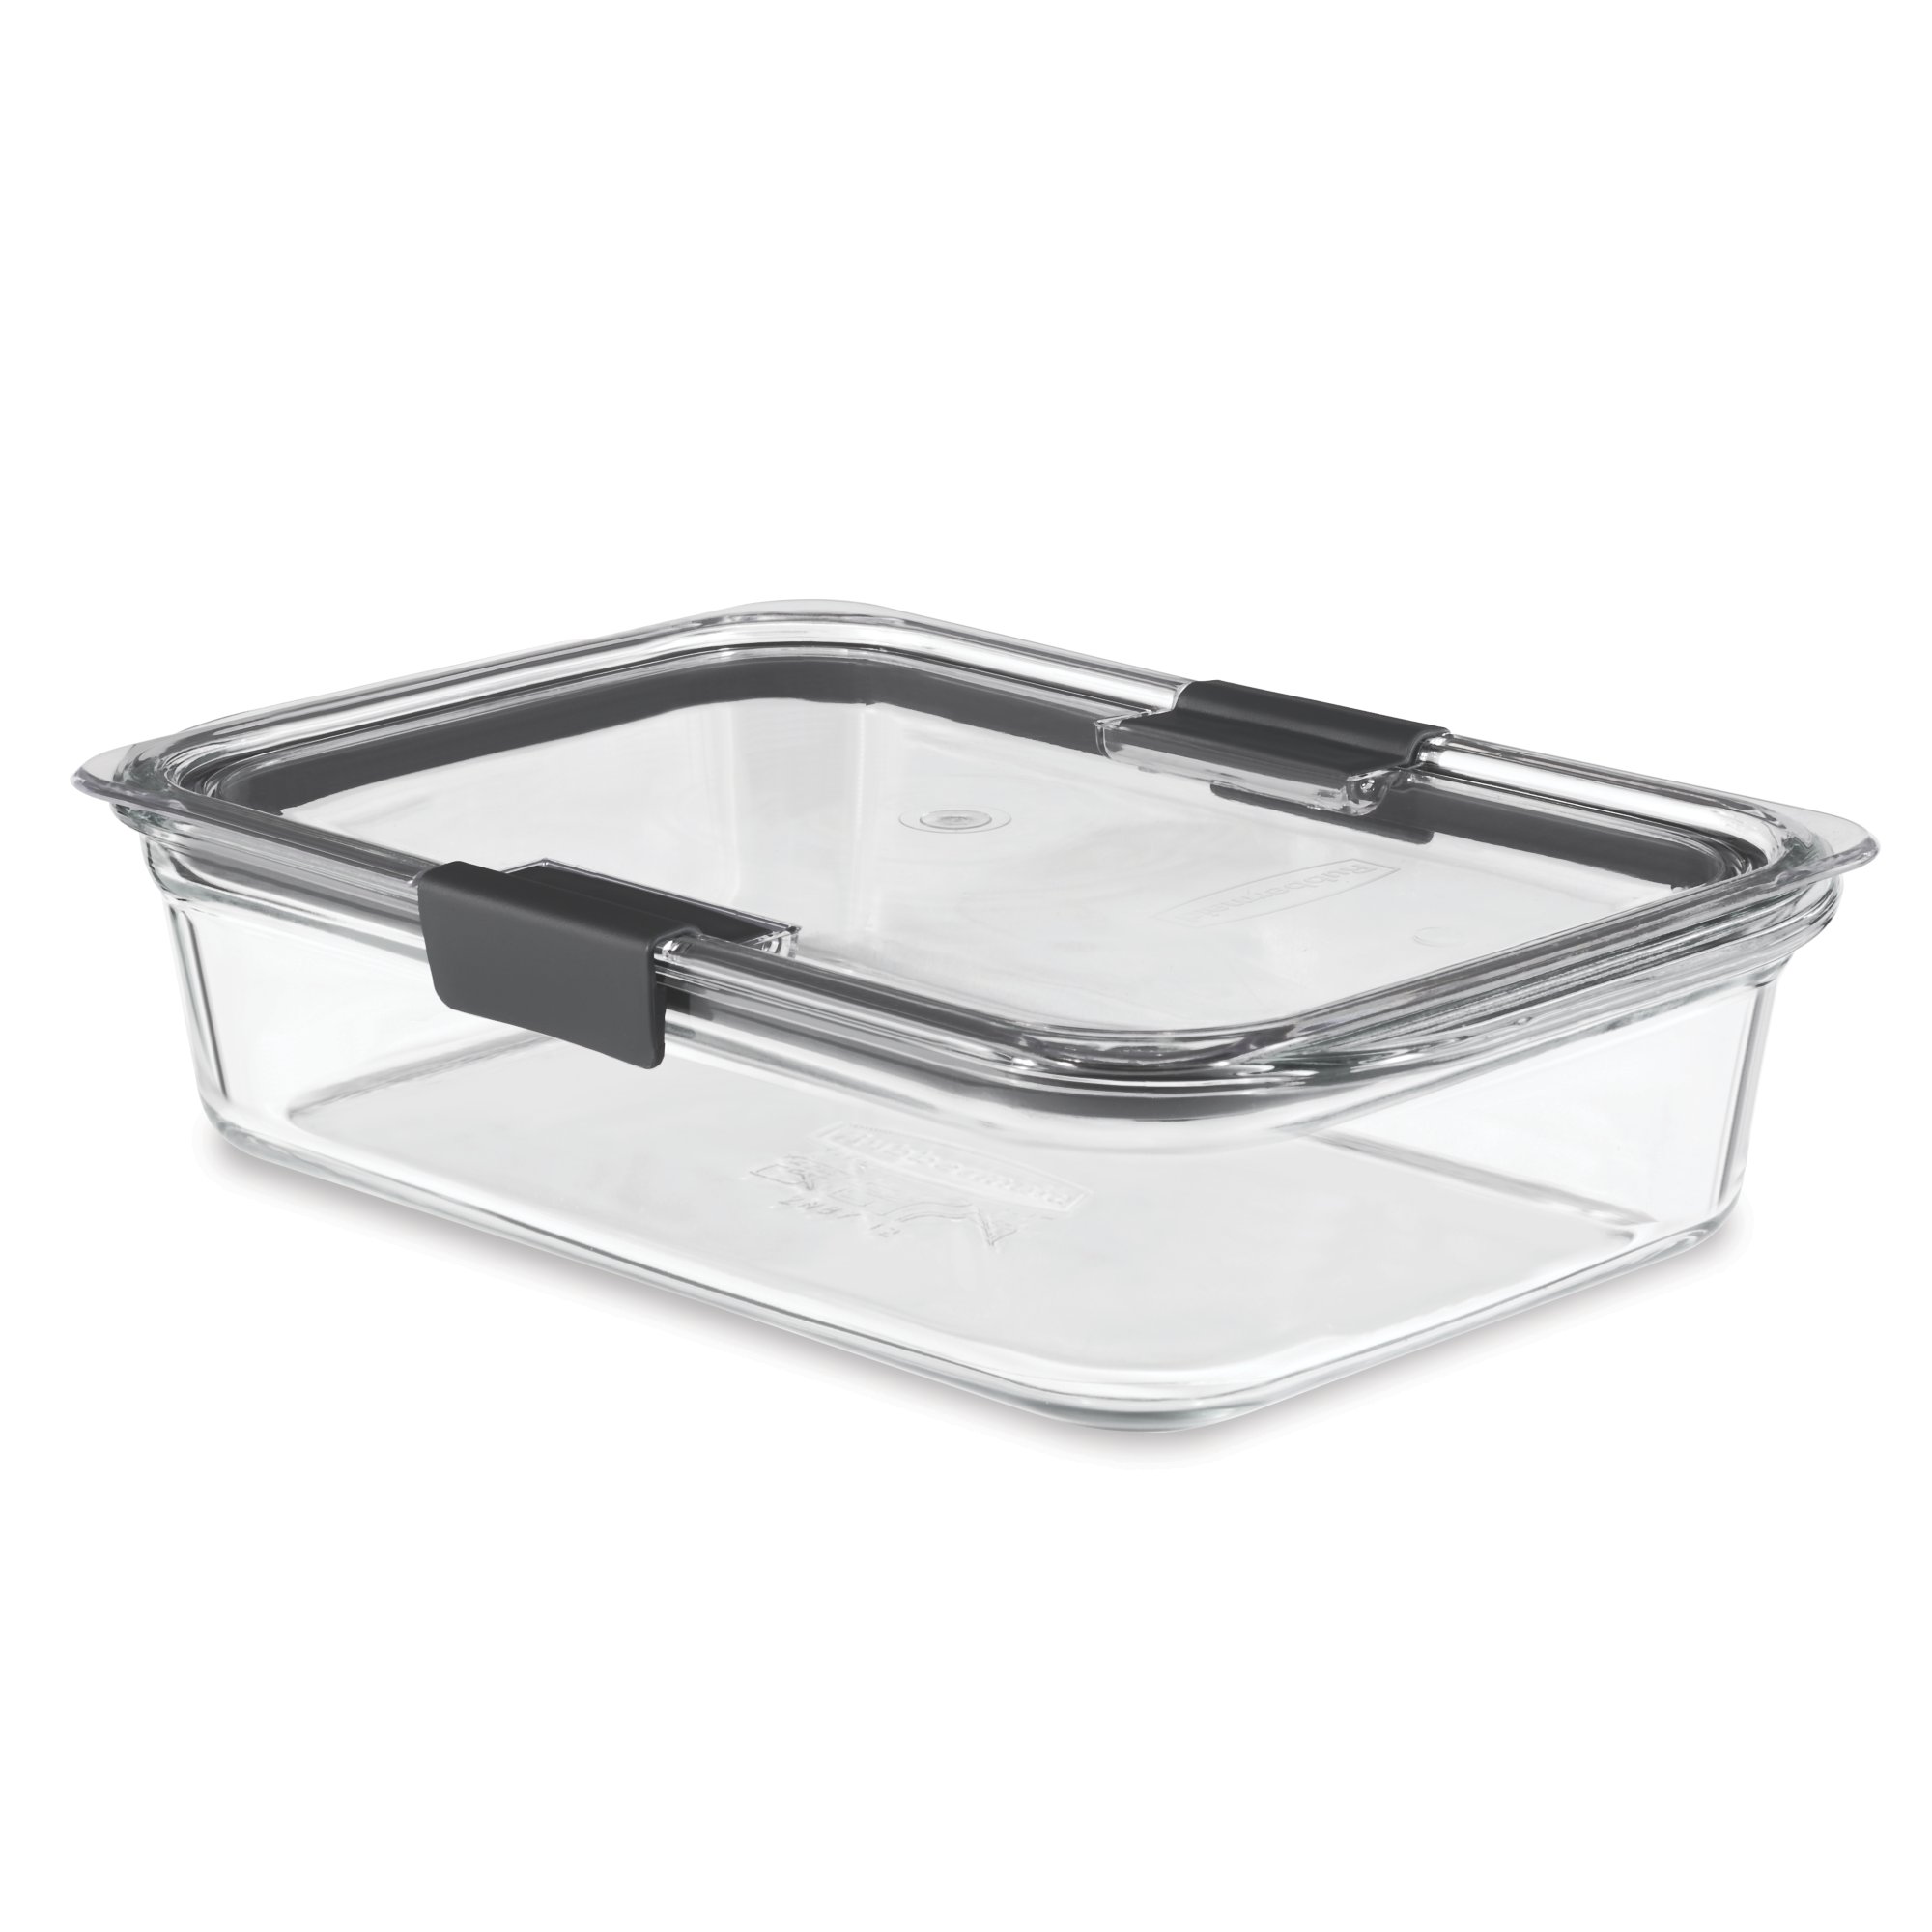 https://s7d9.scene7.com/is/image/NewellRubbermaid/2118314-rubbermaid-food-storage-brilliance-glass-clear-8c-angle?wid=2000&hei=2000